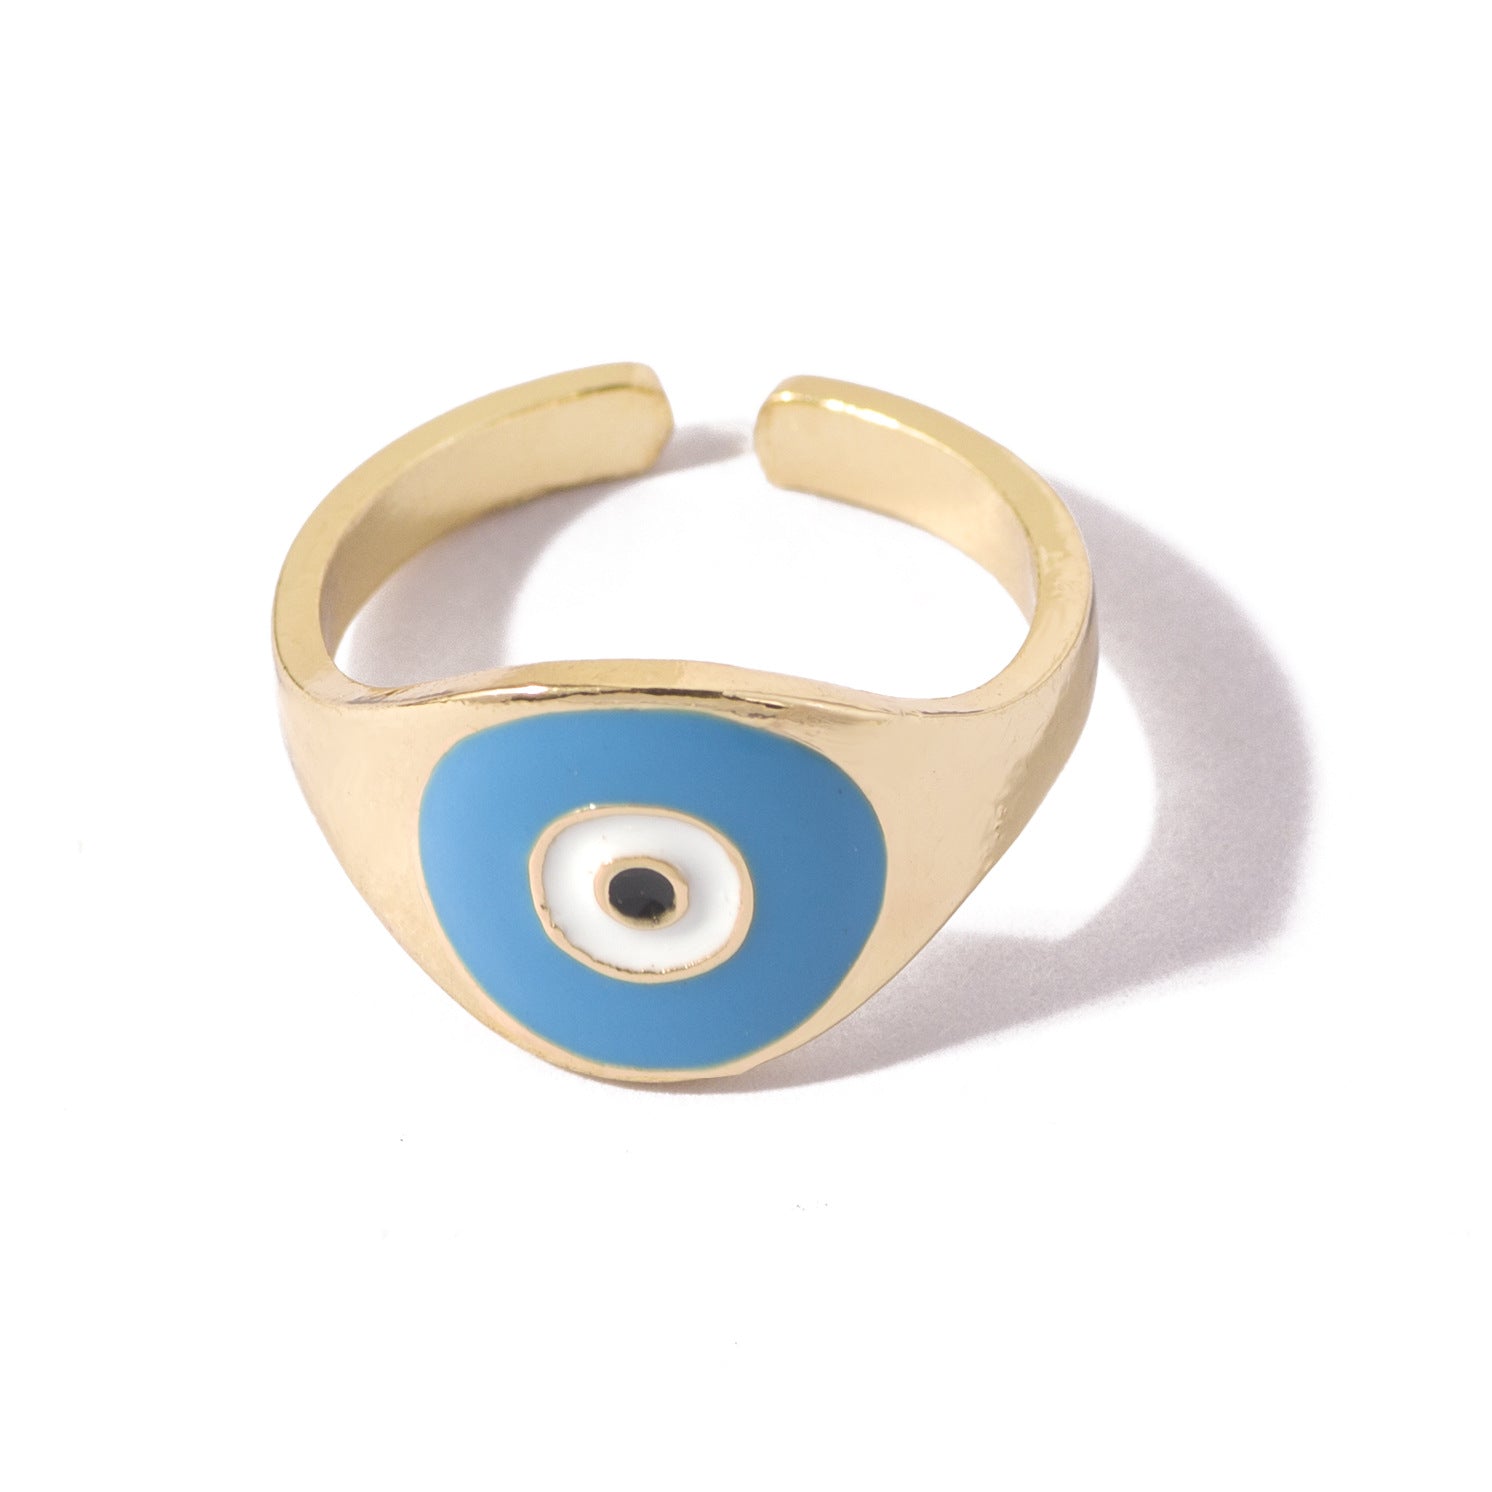 Arzonai  new jewelry alloy funny drip eye ring exquisite all-match trend jewelry